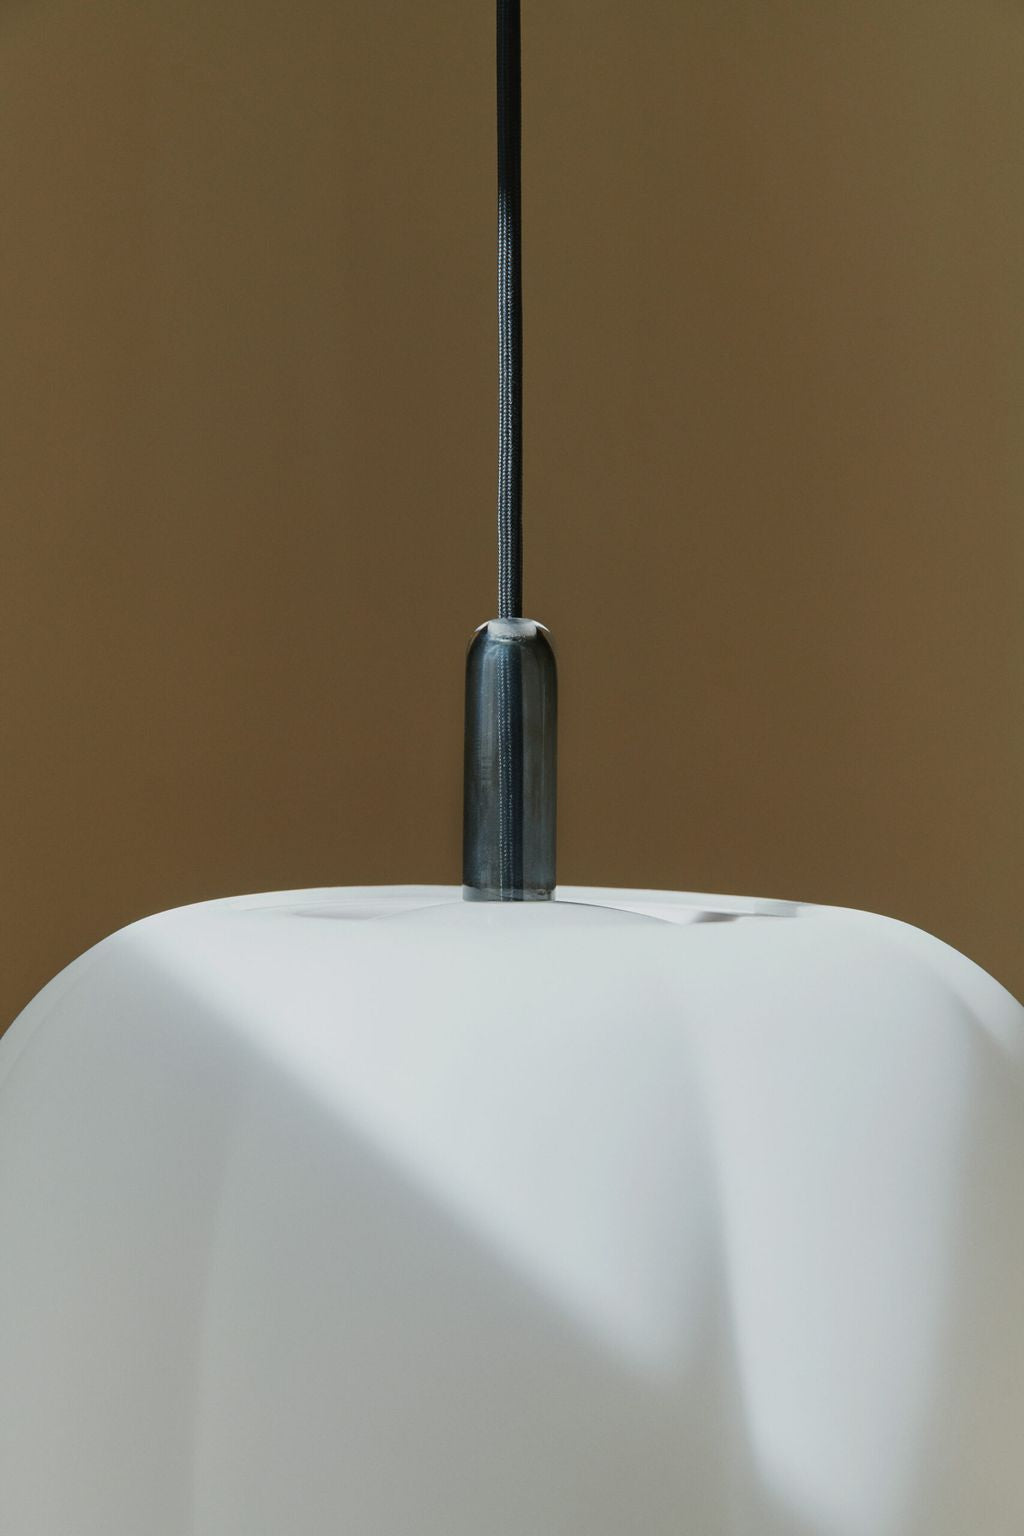 Made By Hand Pepo hanger lamp, Ø 30